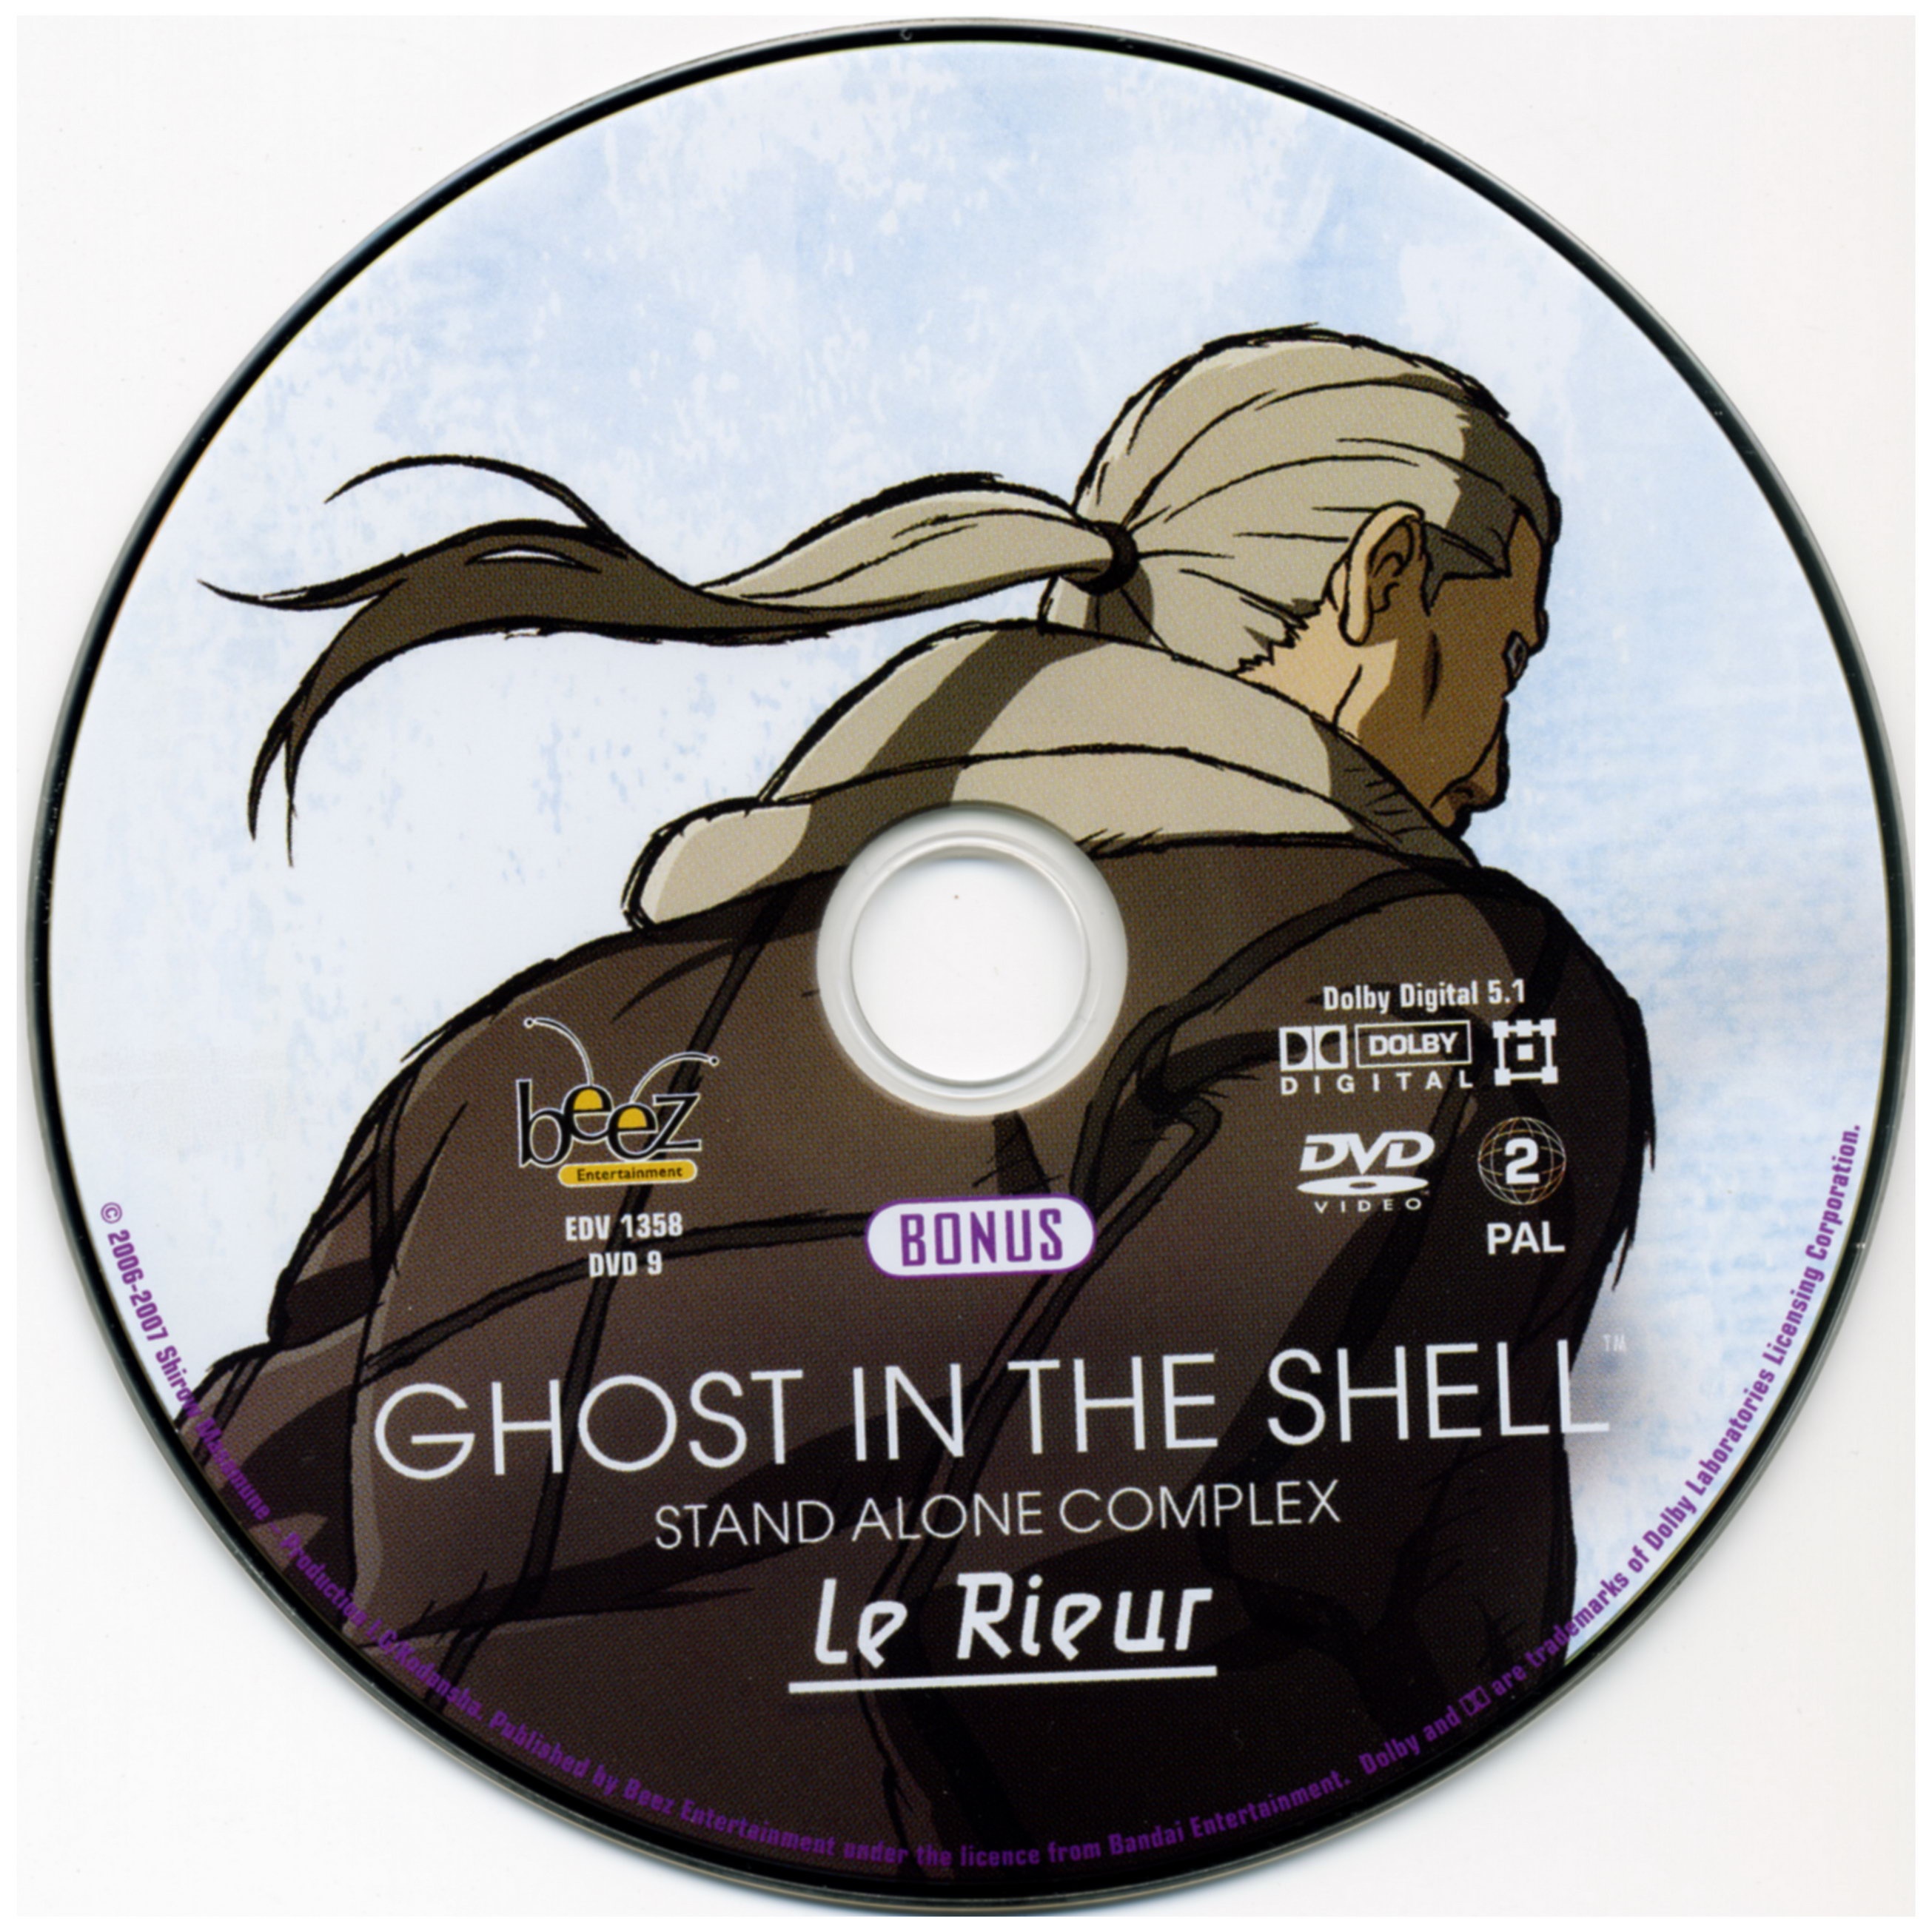 Ghost in the shell stand alone complexe le rieur DISC 2